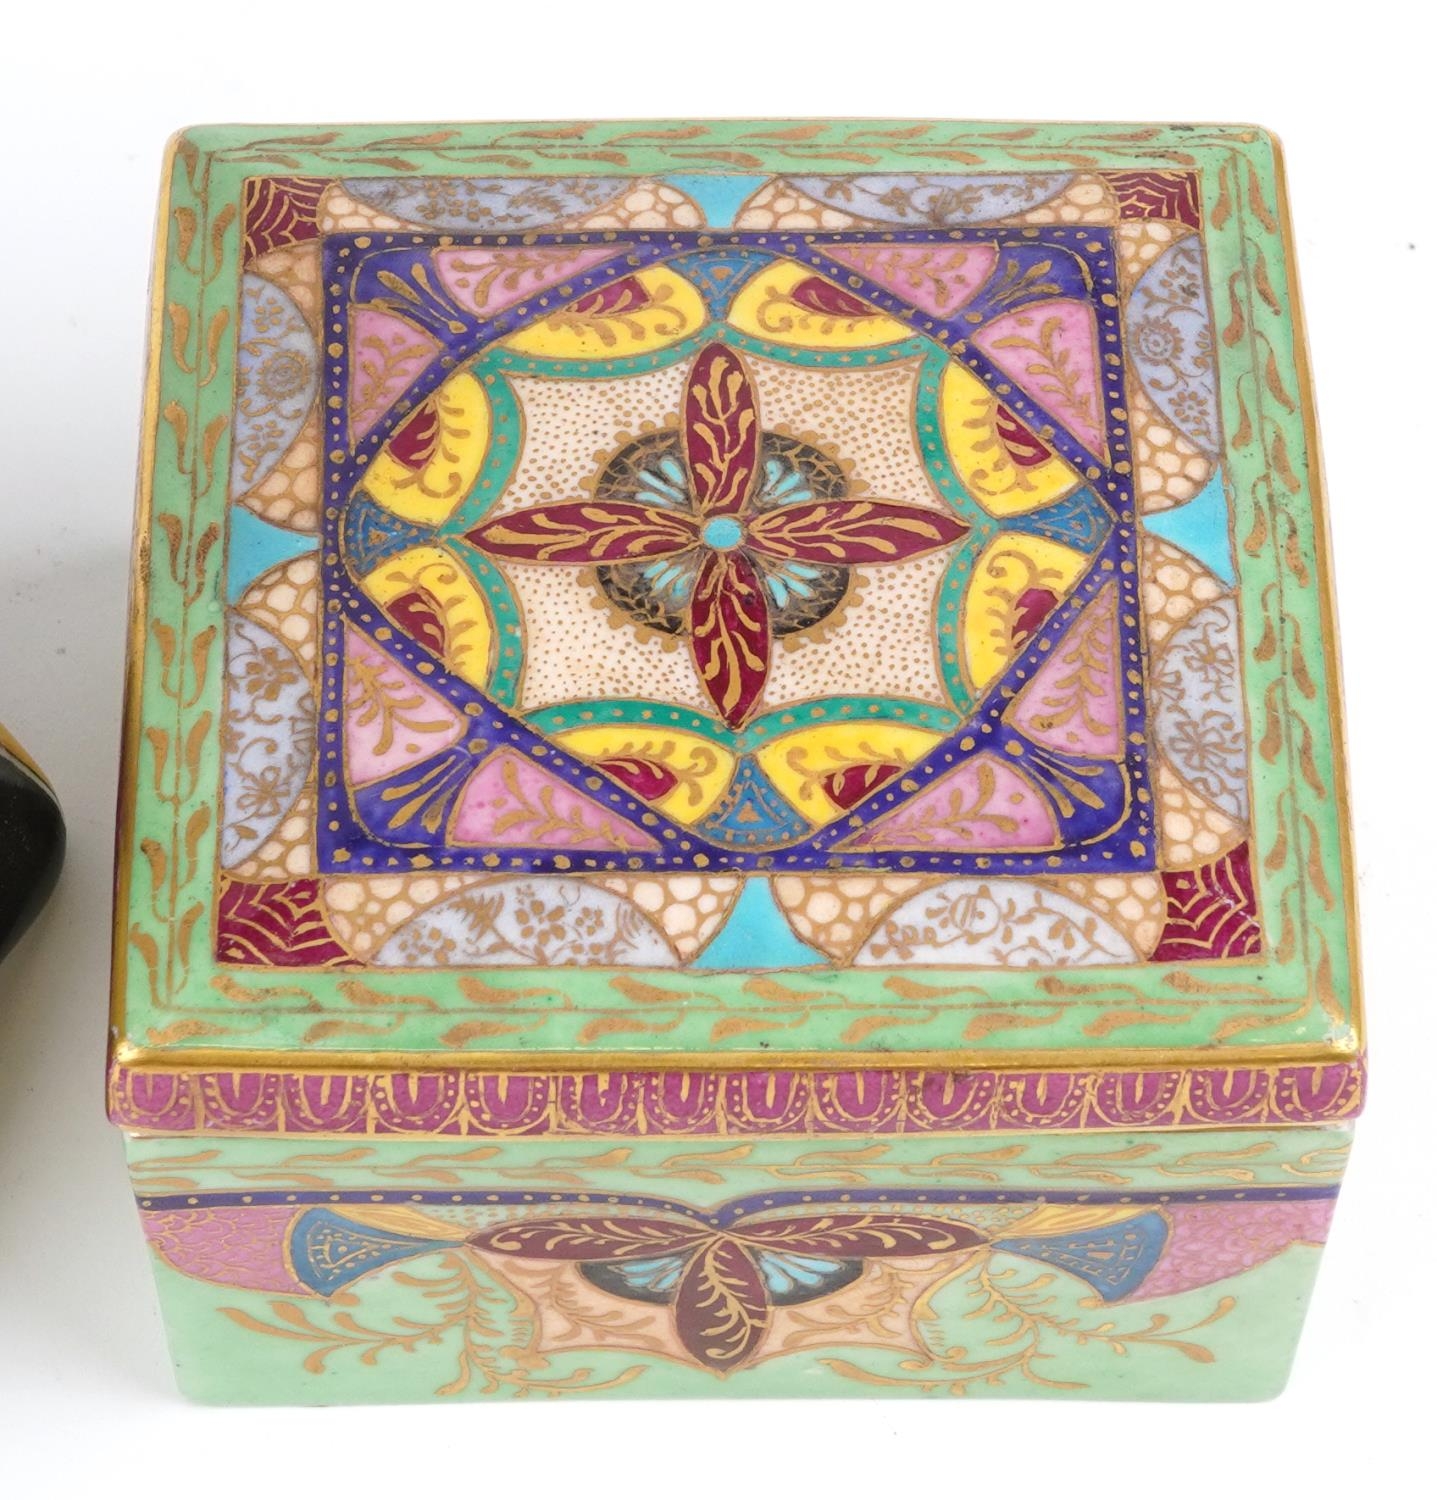 Pair of Art Nouveau hexagonal vases decorated with foliate motifs and a 1930s square box and cover - Image 3 of 5